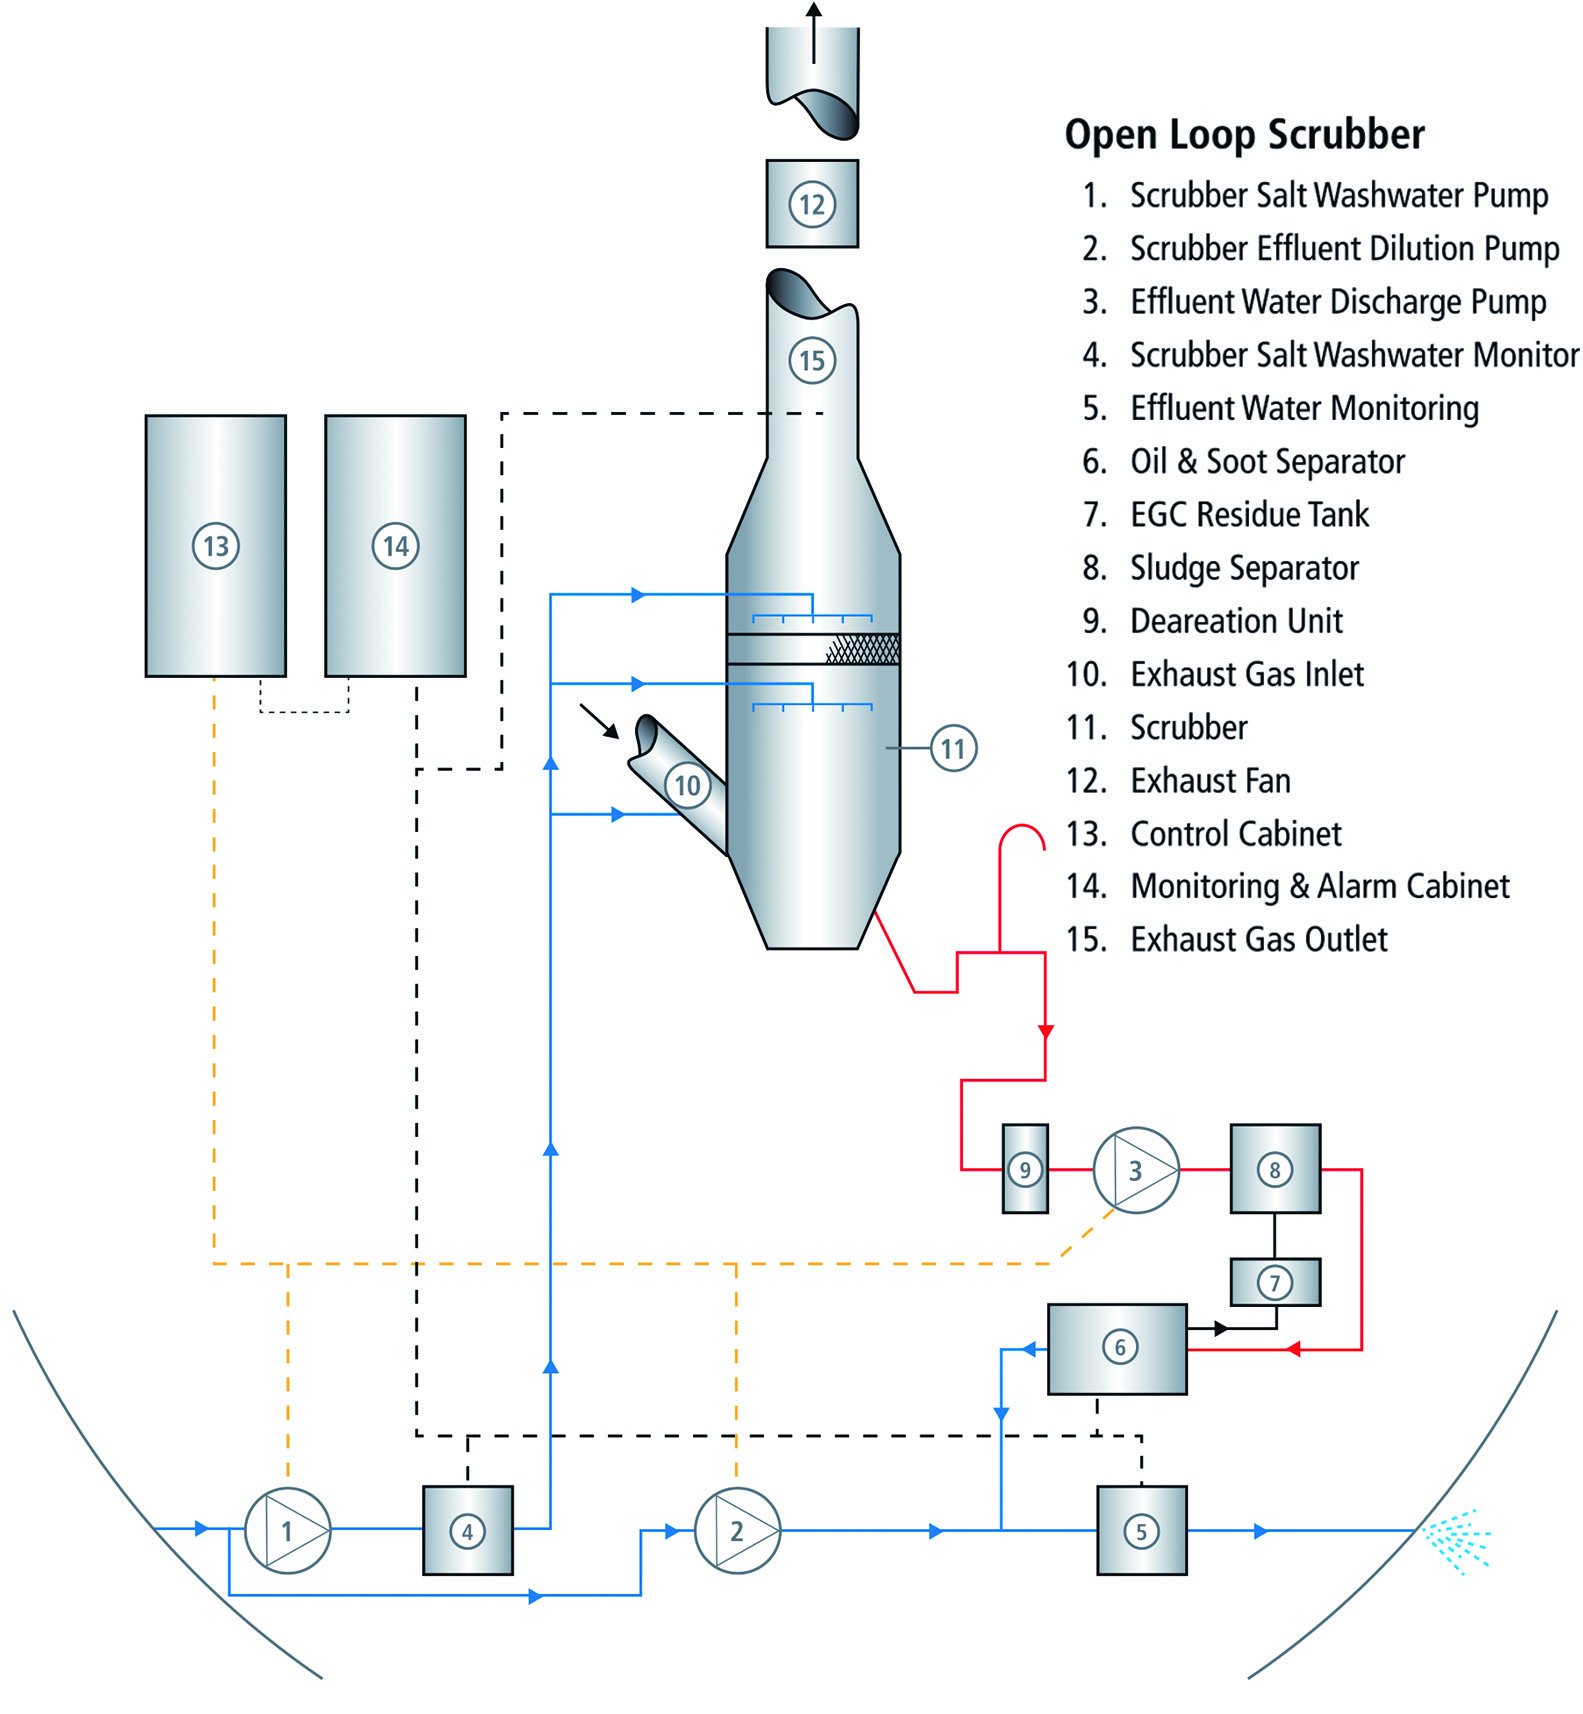 SCRUBBER SYSTEMS